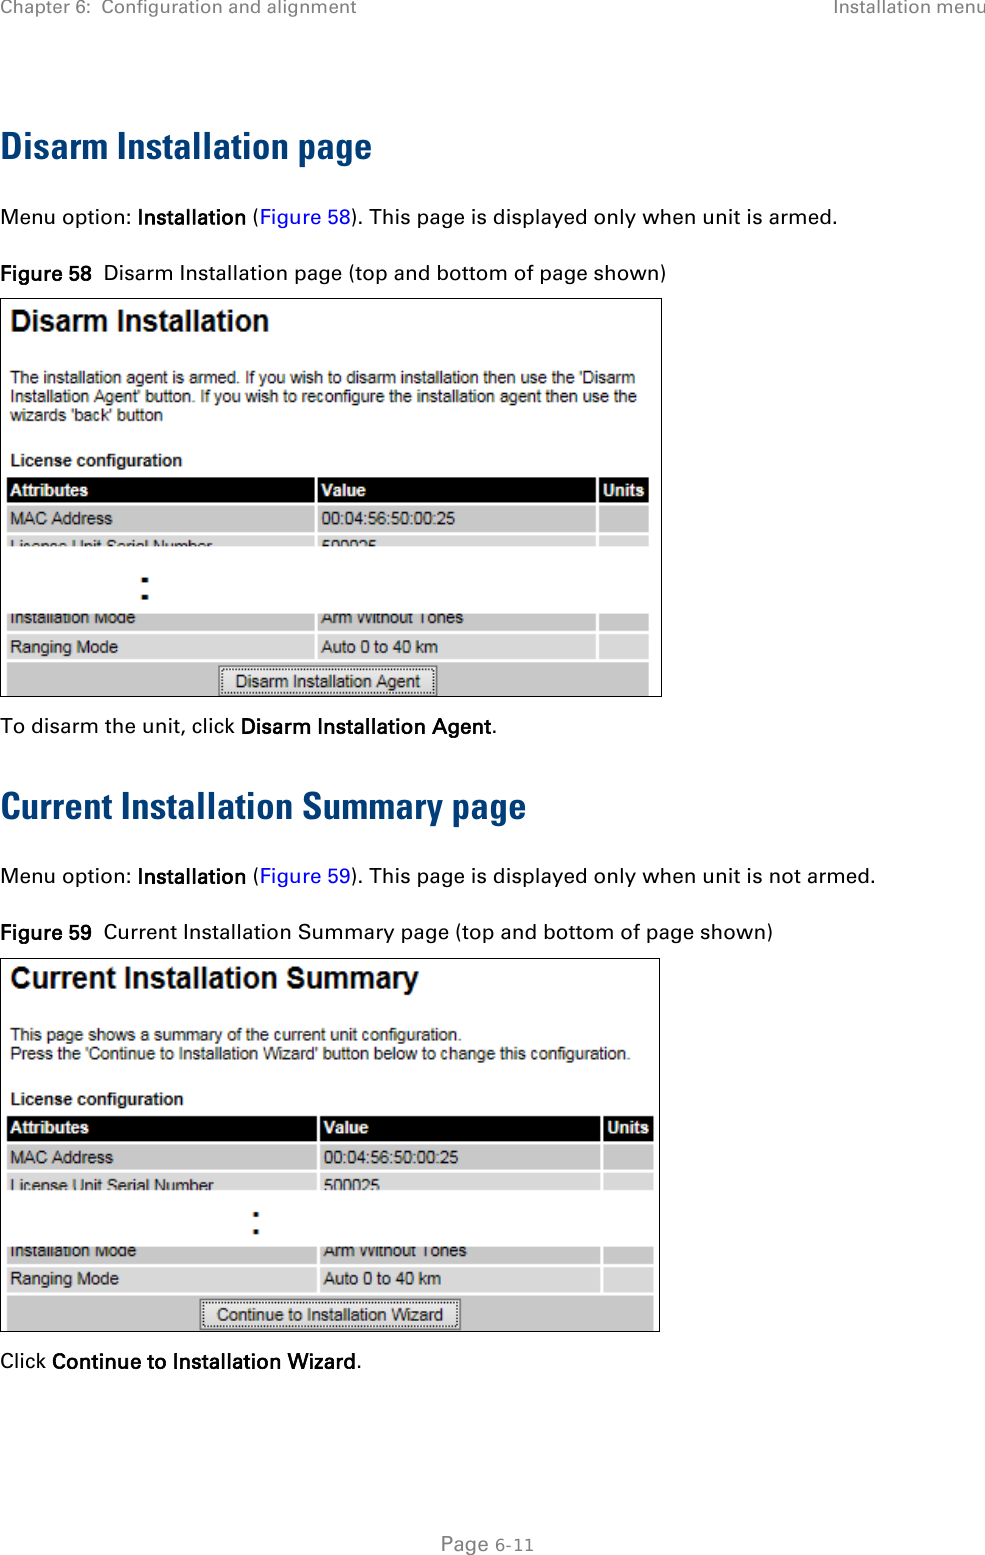 Chapter 6:  Configuration and alignment Installation menu  Disarm Installation page Menu option: Installation (Figure 58). This page is displayed only when unit is armed. Figure 58  Disarm Installation page (top and bottom of page shown)  To disarm the unit, click Disarm Installation Agent. Current Installation Summary page Menu option: Installation (Figure 59). This page is displayed only when unit is not armed.  Figure 59  Current Installation Summary page (top and bottom of page shown)  Click Continue to Installation Wizard.  Page 6-11 